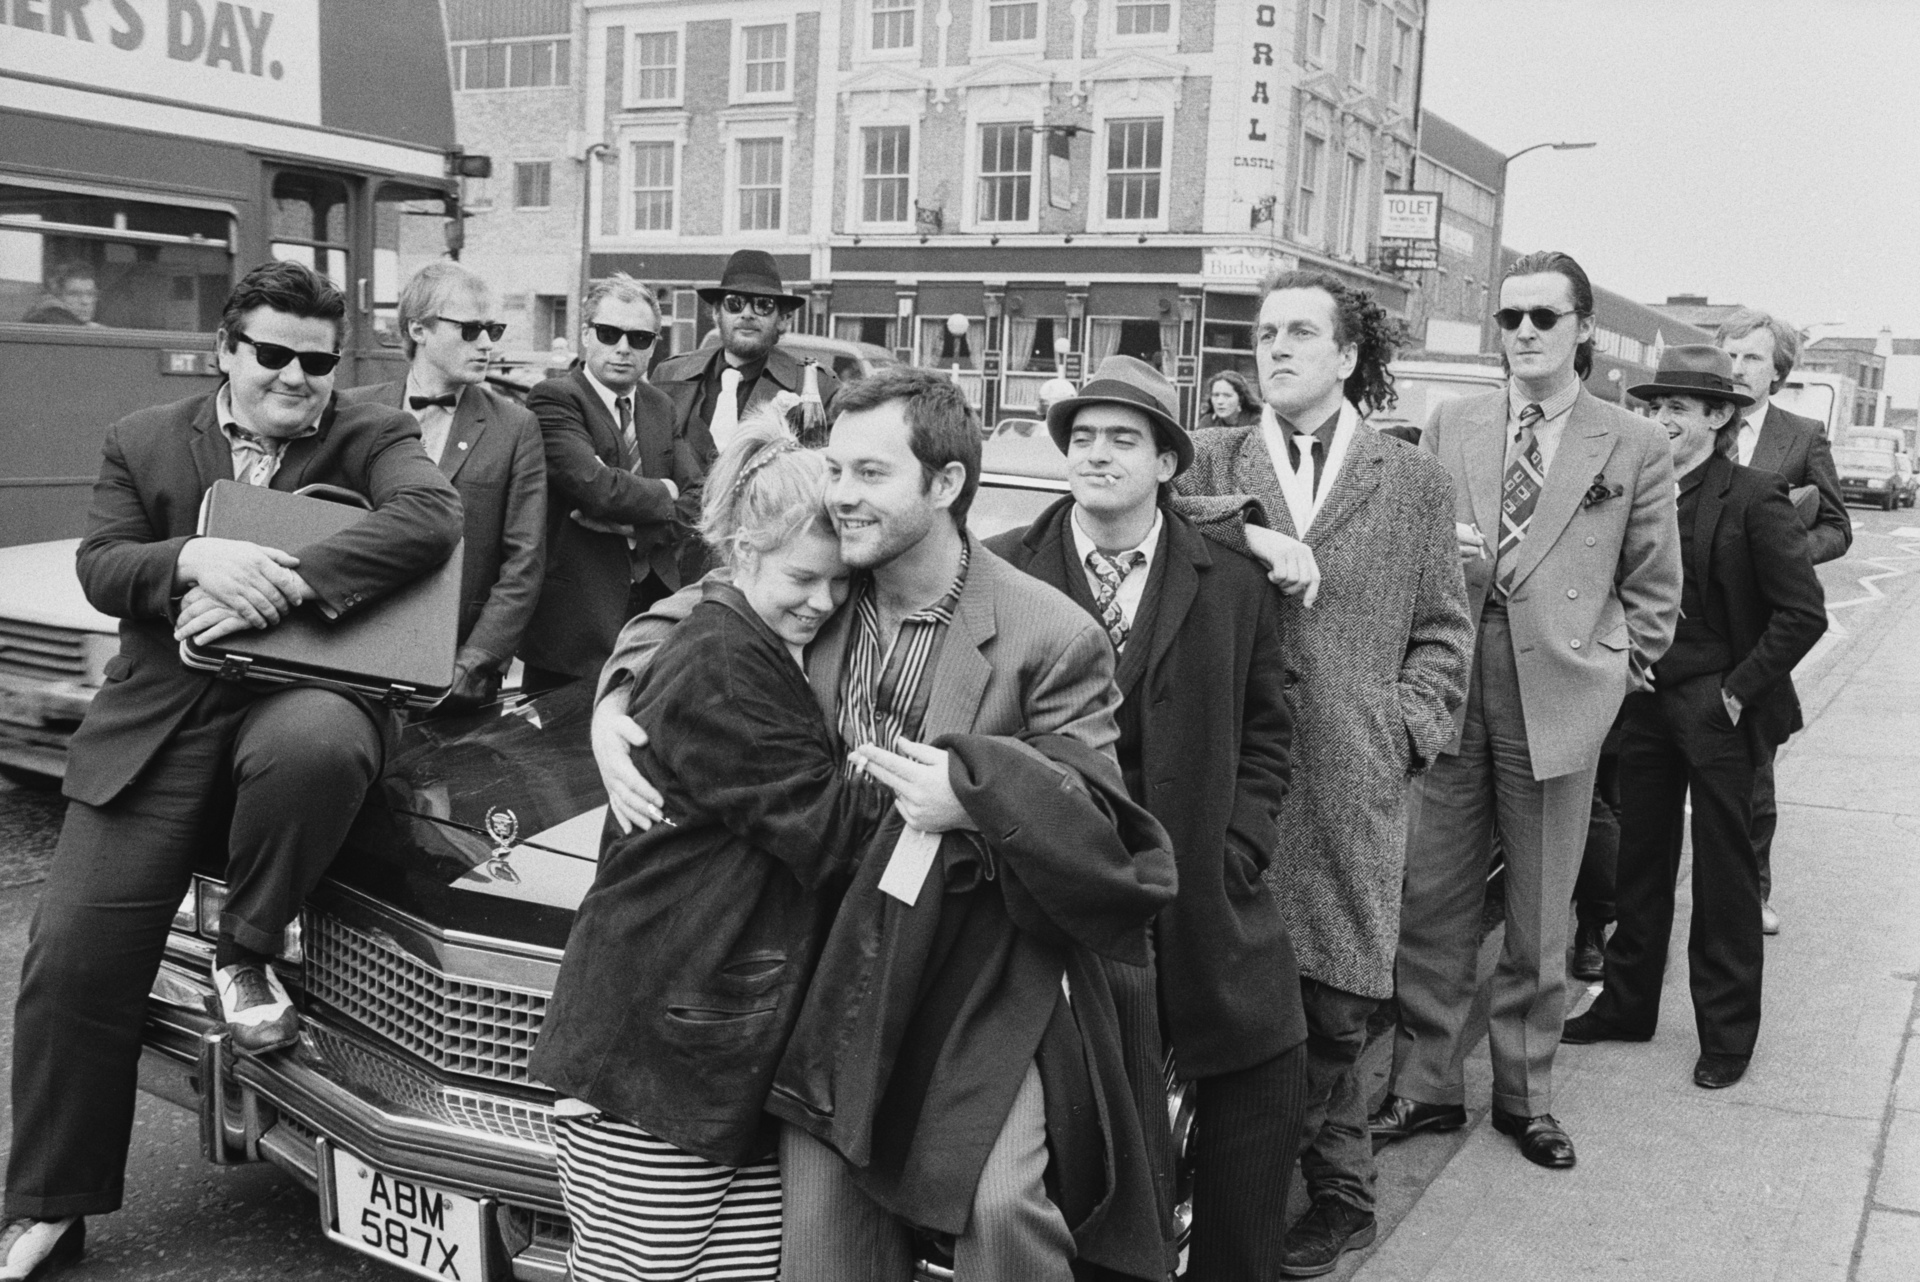 British film producer Alison Owen and her husband, British actor Keith Allen with cast members, British actors Robbie Coltrane, Adrian Edmondson, Peter Richardson, Kevin Allen and Clive Russell posing around Cadillac on the set of 'The Supergrass' outside Pentonville Prison on Caledonian Road in London, England, 24th January 1985. (Photo by D. Jones/Daily Express/Hulton Archive/Getty Images)